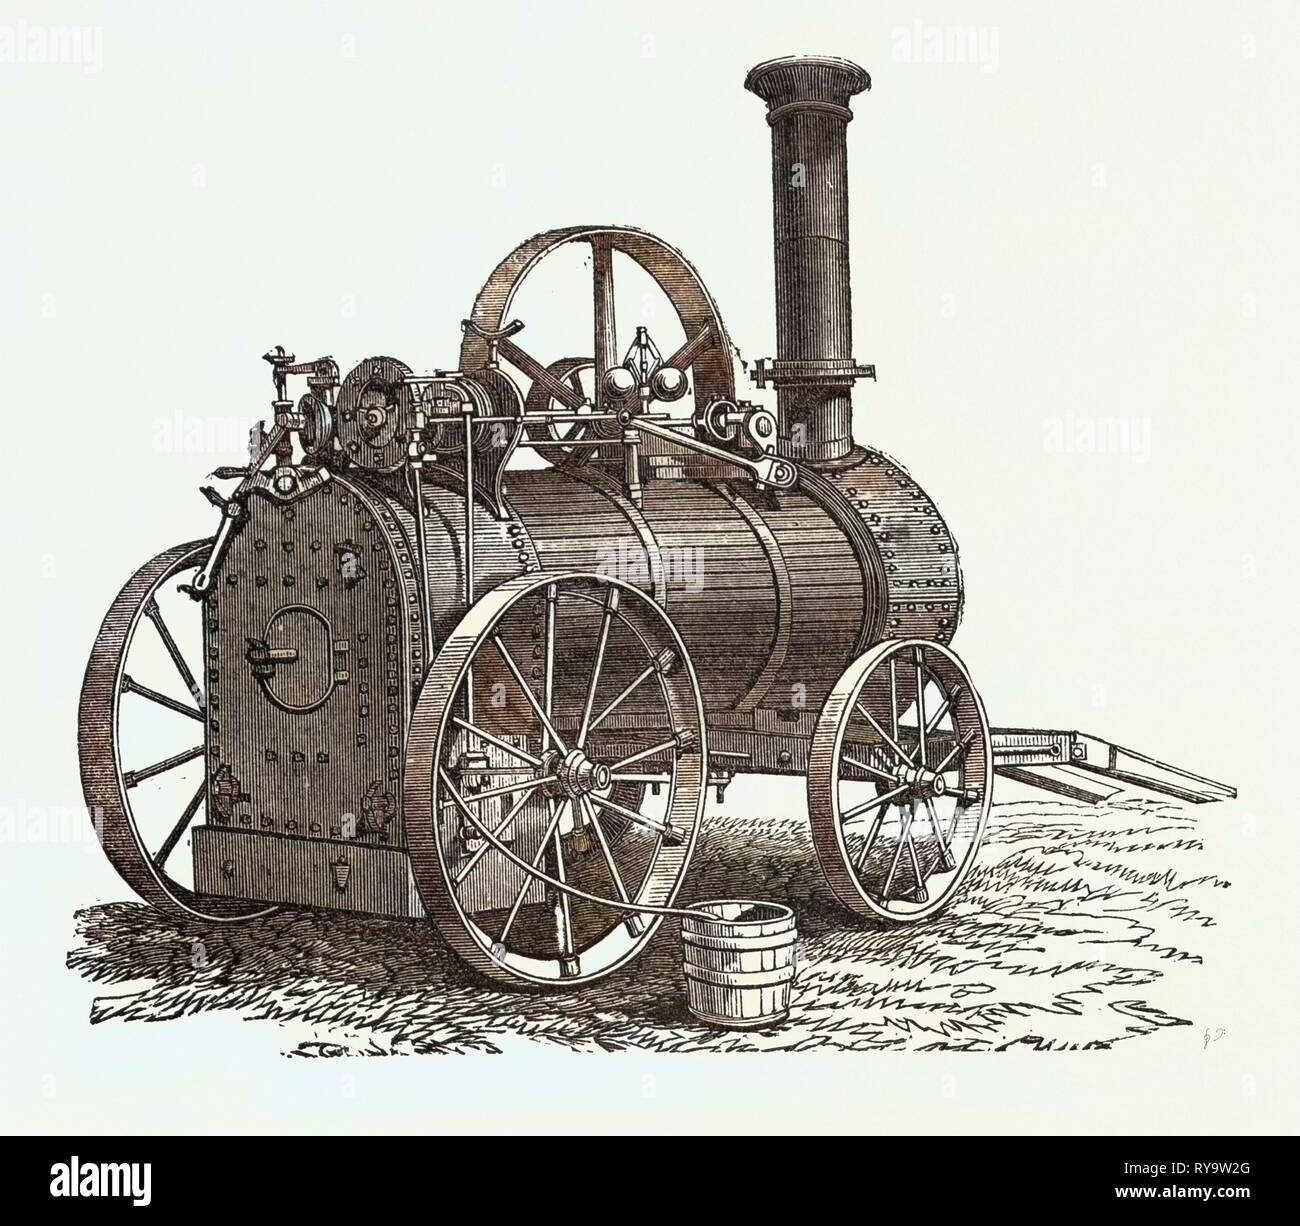 Clayton, Shuttleworth, and Co.'s Portable Steam Engine Stock Photo